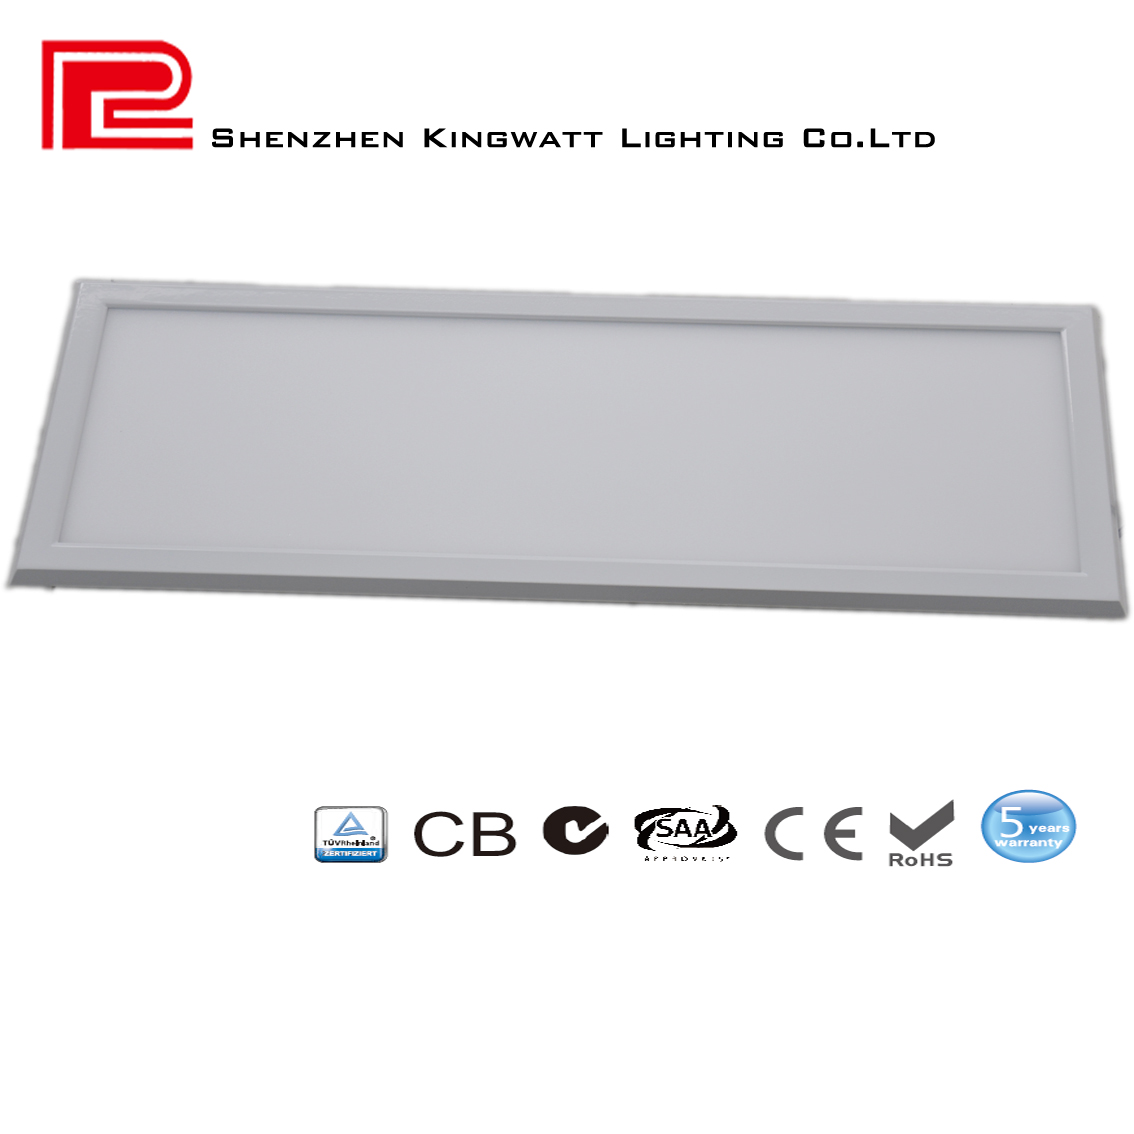 CB/CTEL/SAA/RoHS 100Lm/W LED Panel Light，300mm*1200mm with 36W